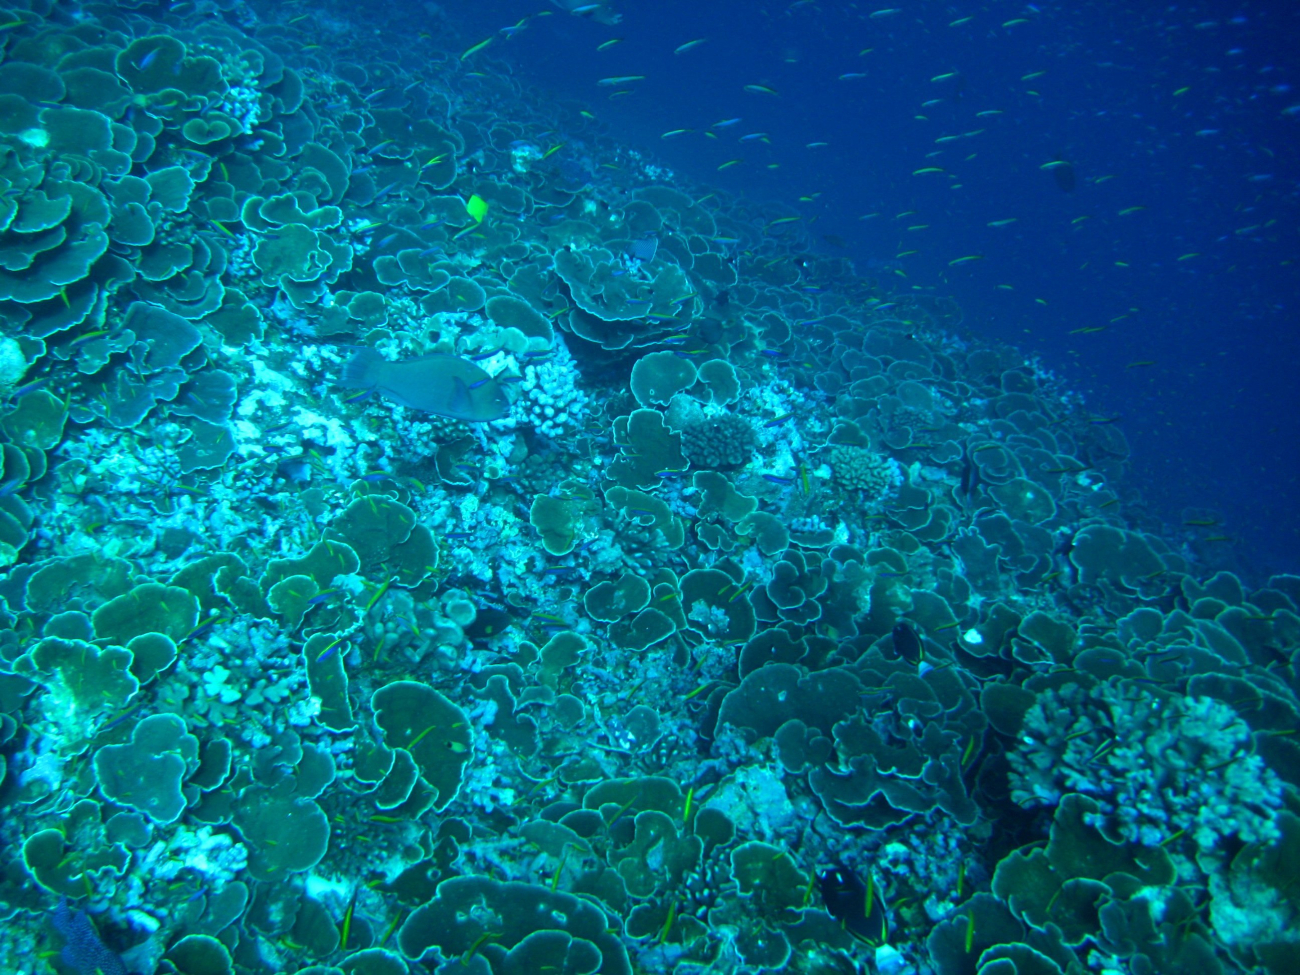 Reef scene with lettuce coral